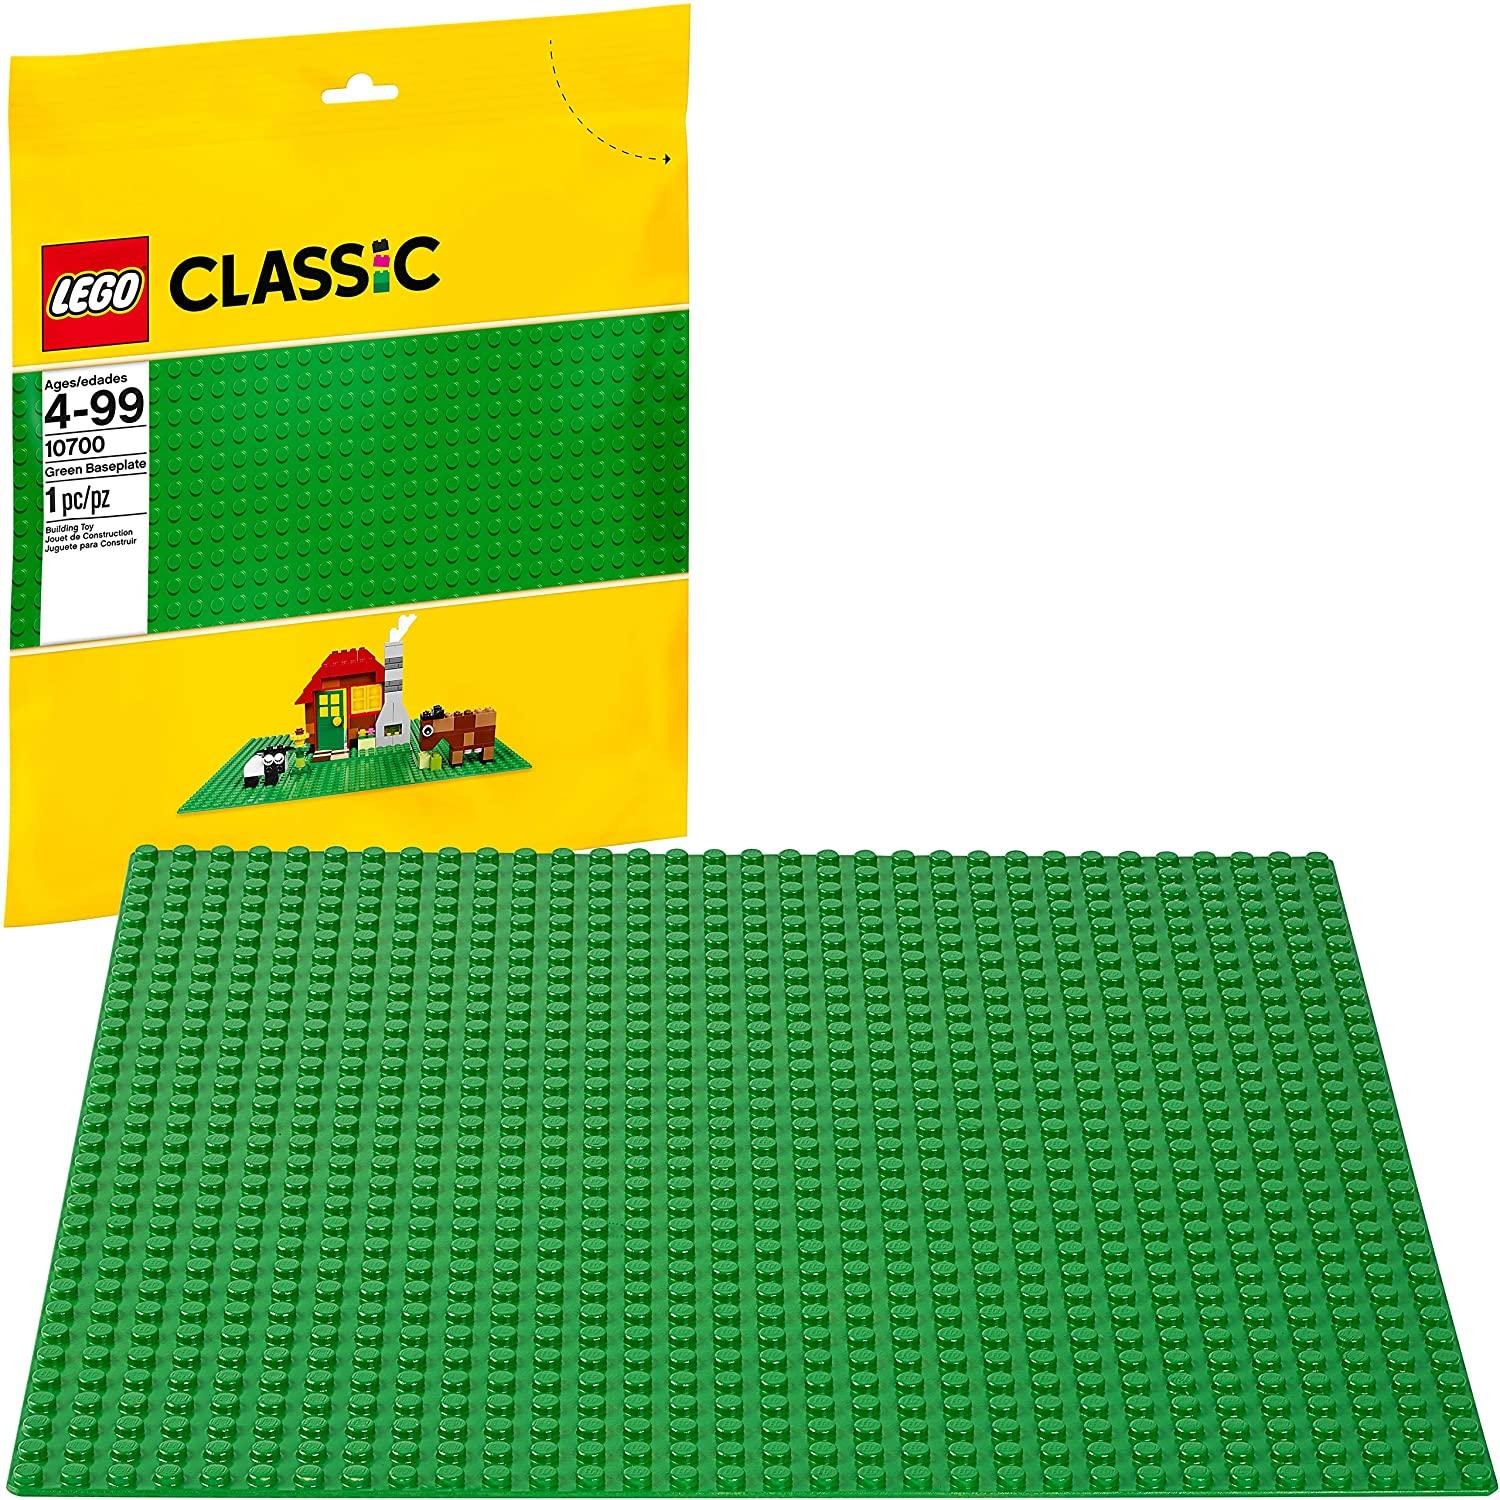 LEGO Classic Green Baseplate for $4.79